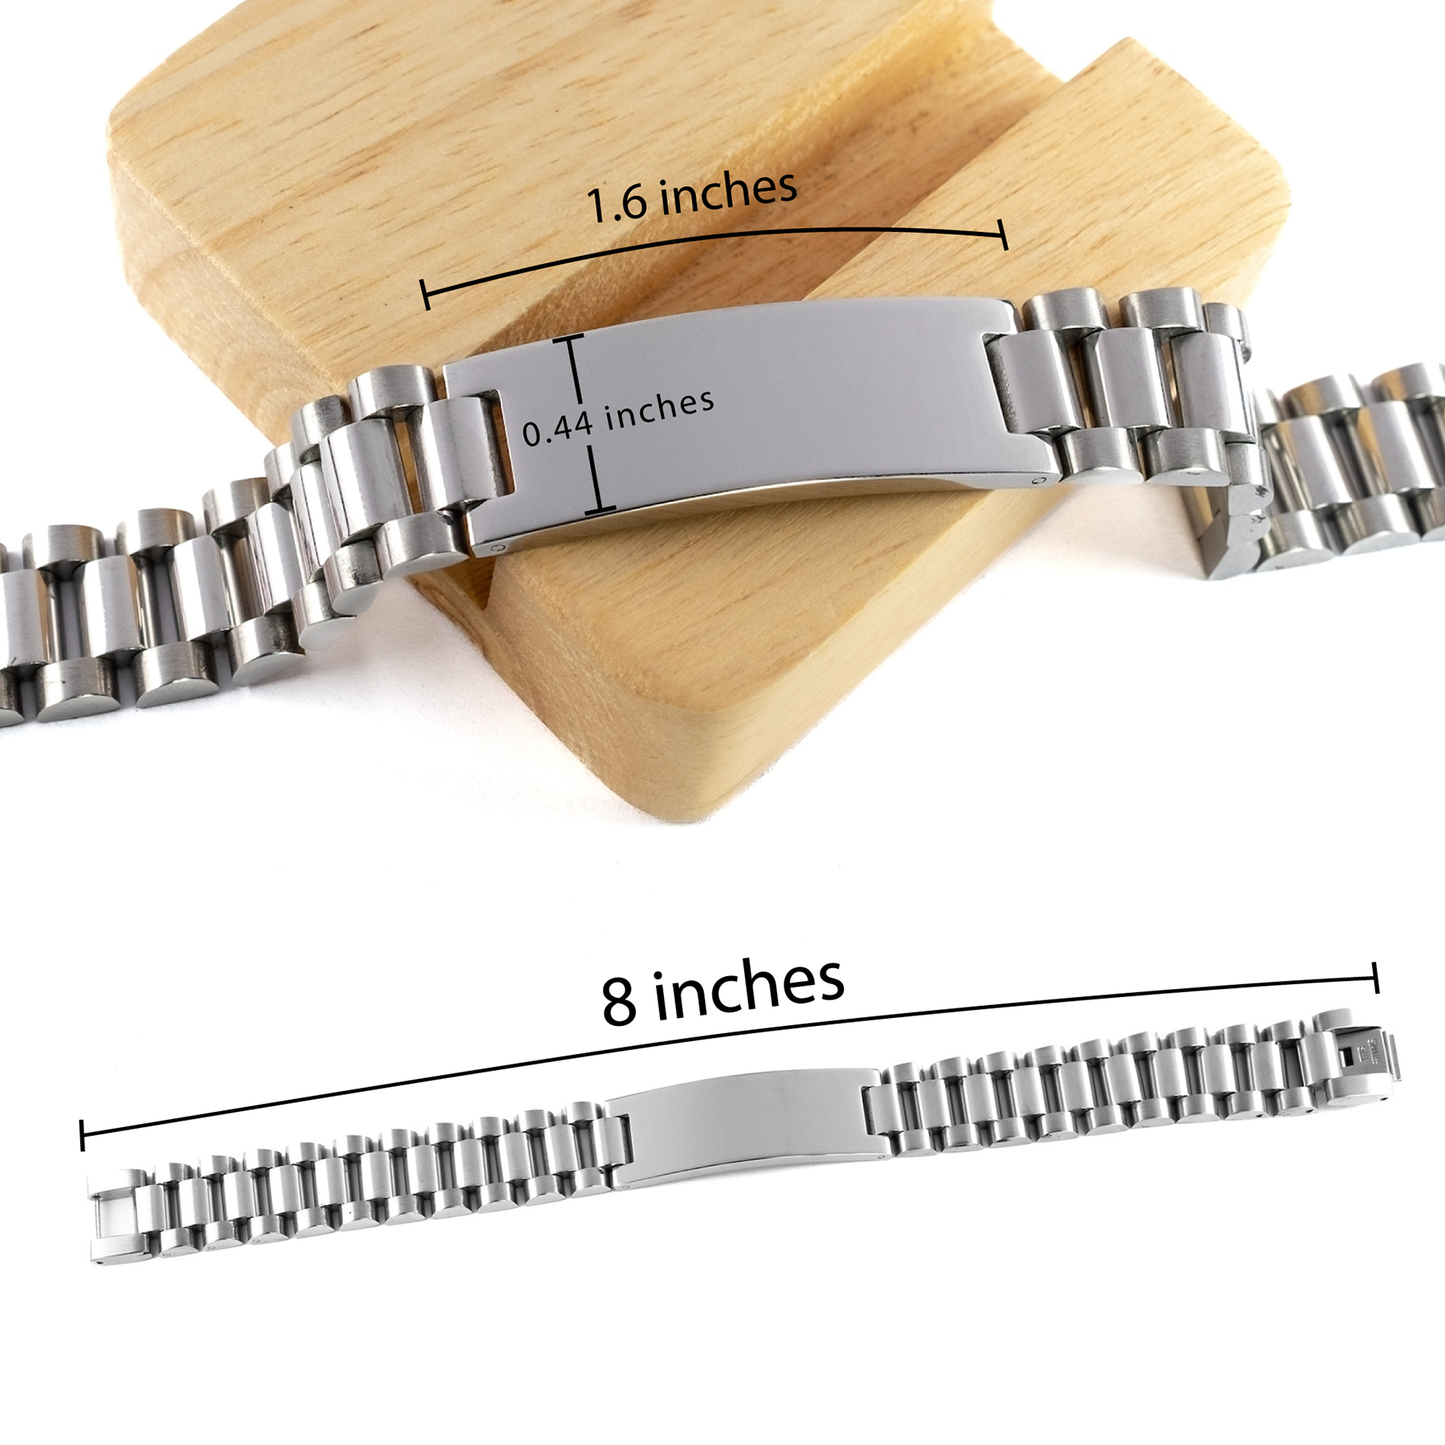 Stainless Steel Ladder Bracelet for Brother - Fear Casteth Out by Perfect Love - Unique Gift for Graduation, Birthdays, and Holidays - Inspirational Brother Bracelet for Confidence and Hope